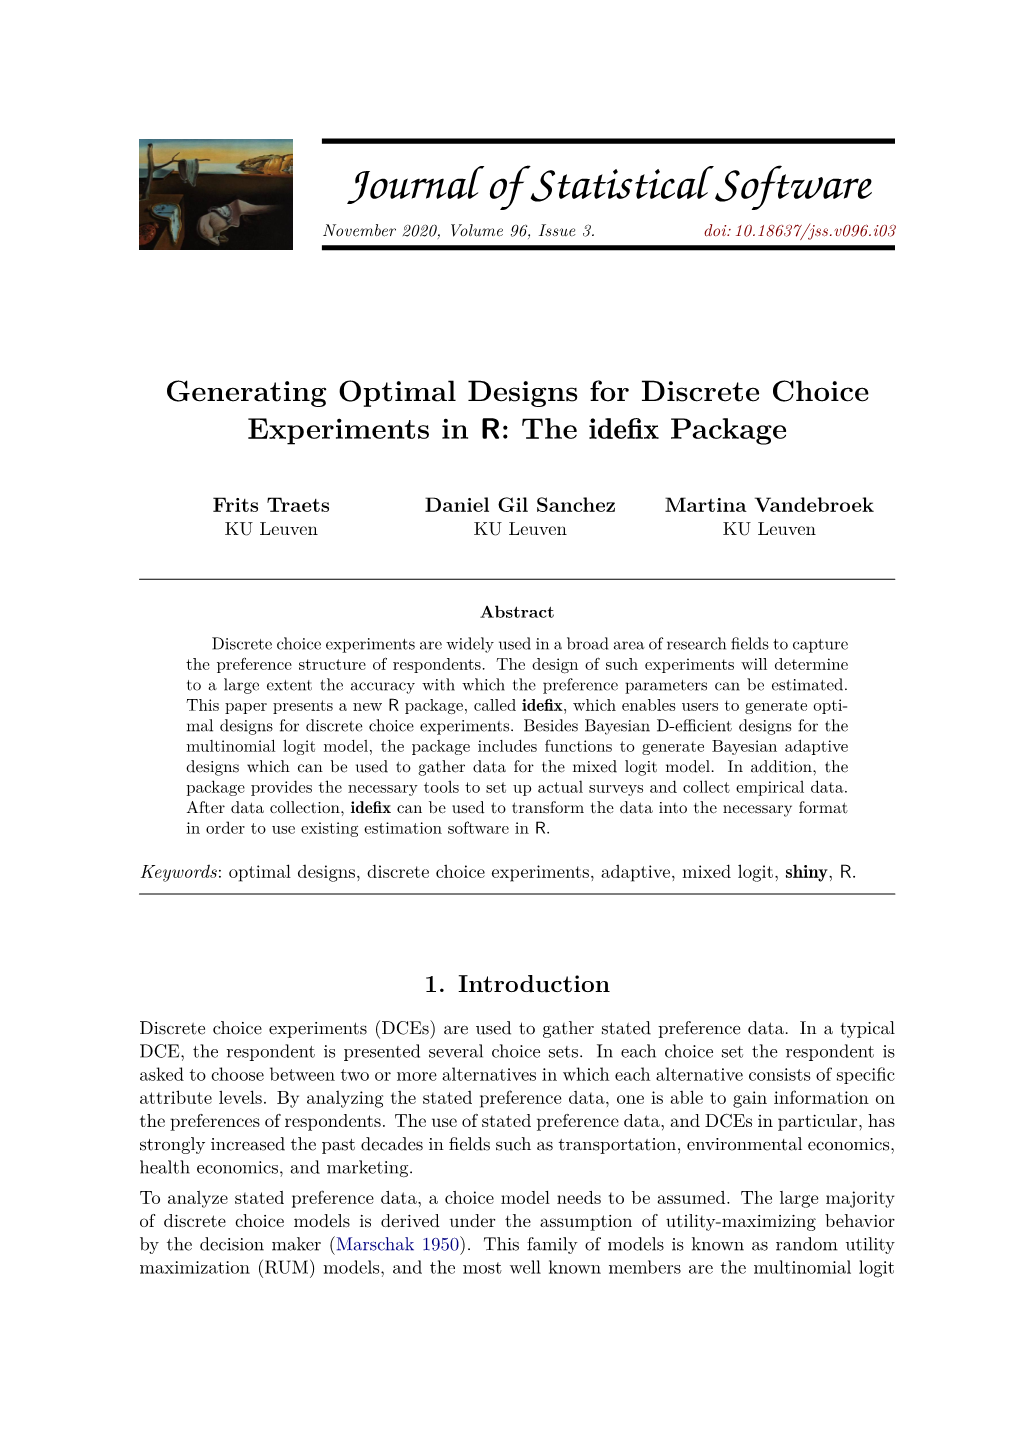 Generating Optimal Designs for Discrete Choice Experiments in R: the Ideﬁx Package